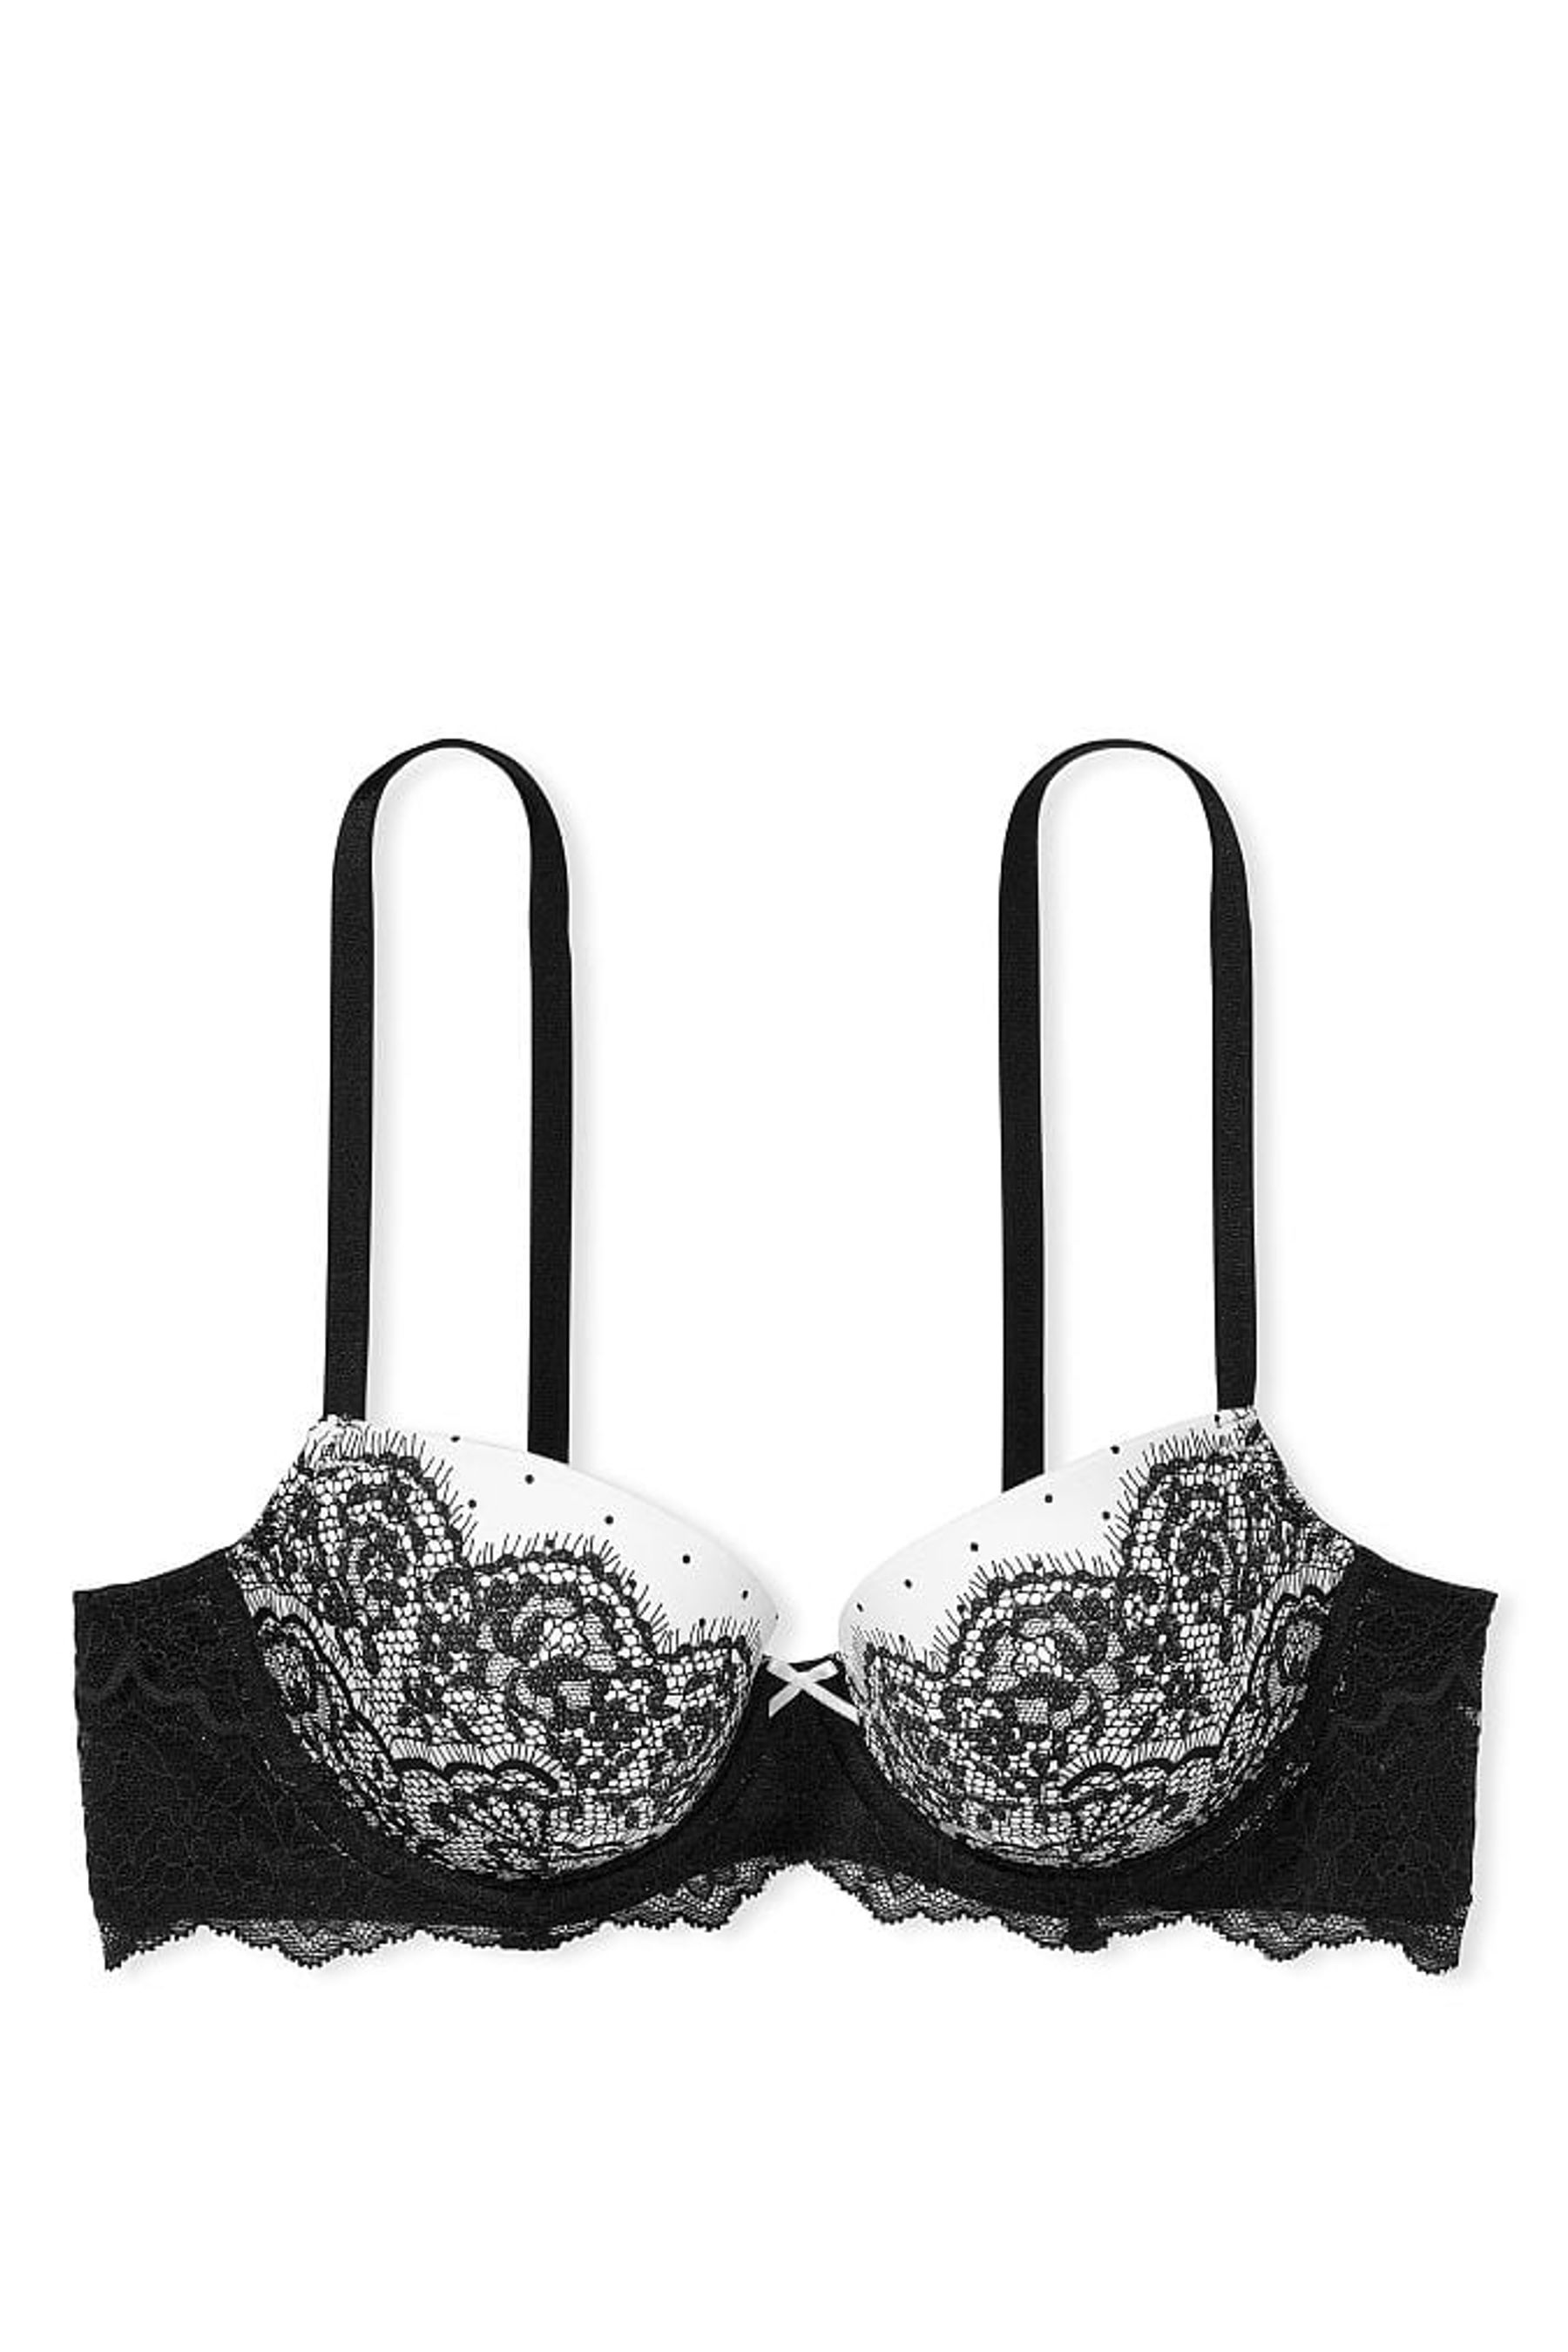 Buy Victoria S Secret Smooth Lace Wing Lightly Lined Demi Bra From The Victoria S Secret Uk